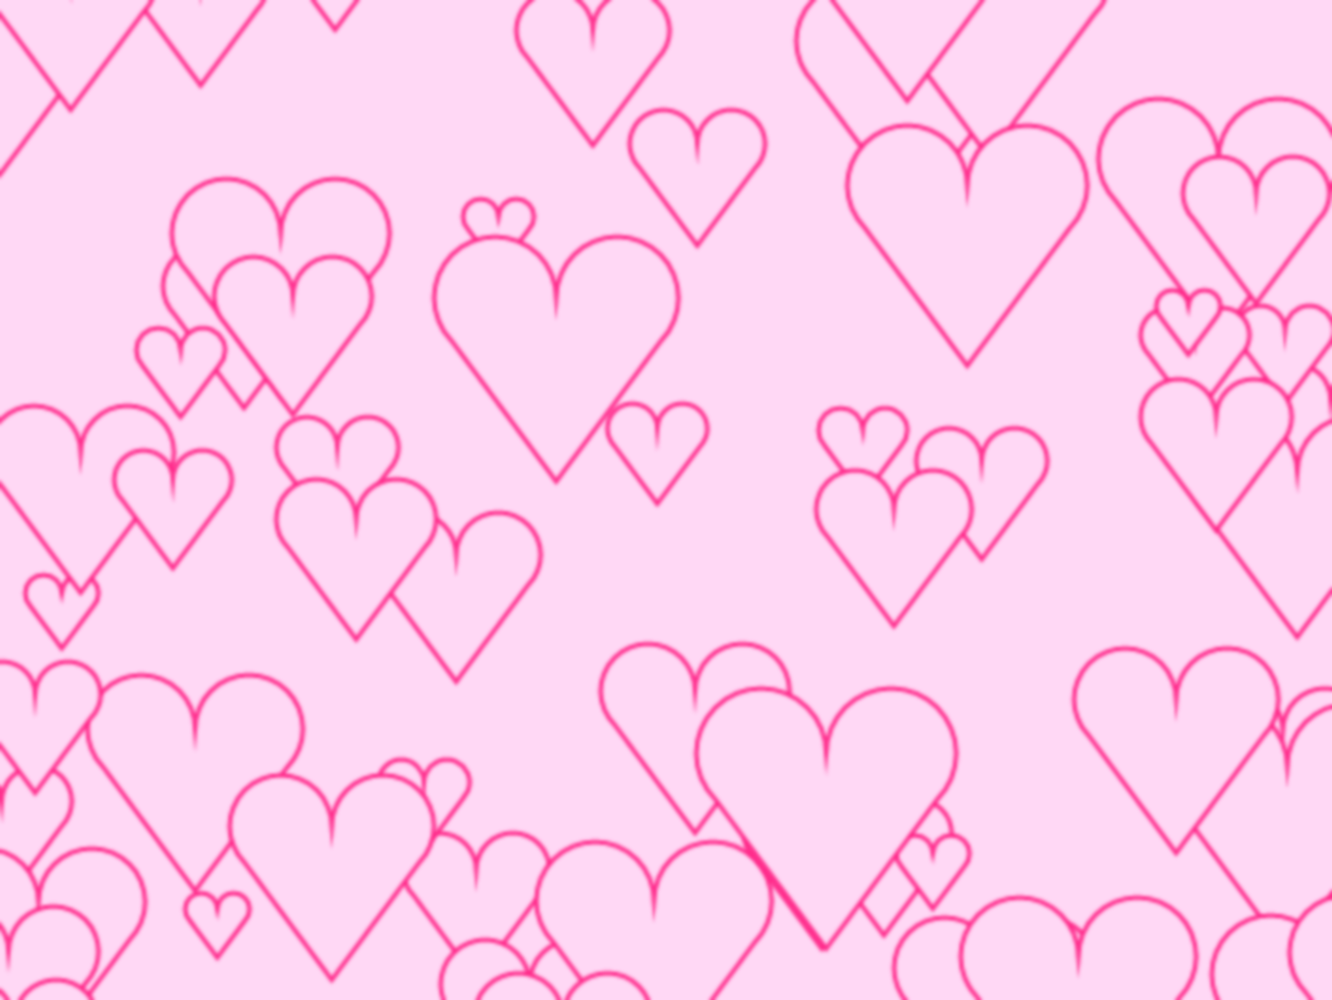 Pink Love Heart Backgrounds - University Of Exeter Students - HD Wallpaper 